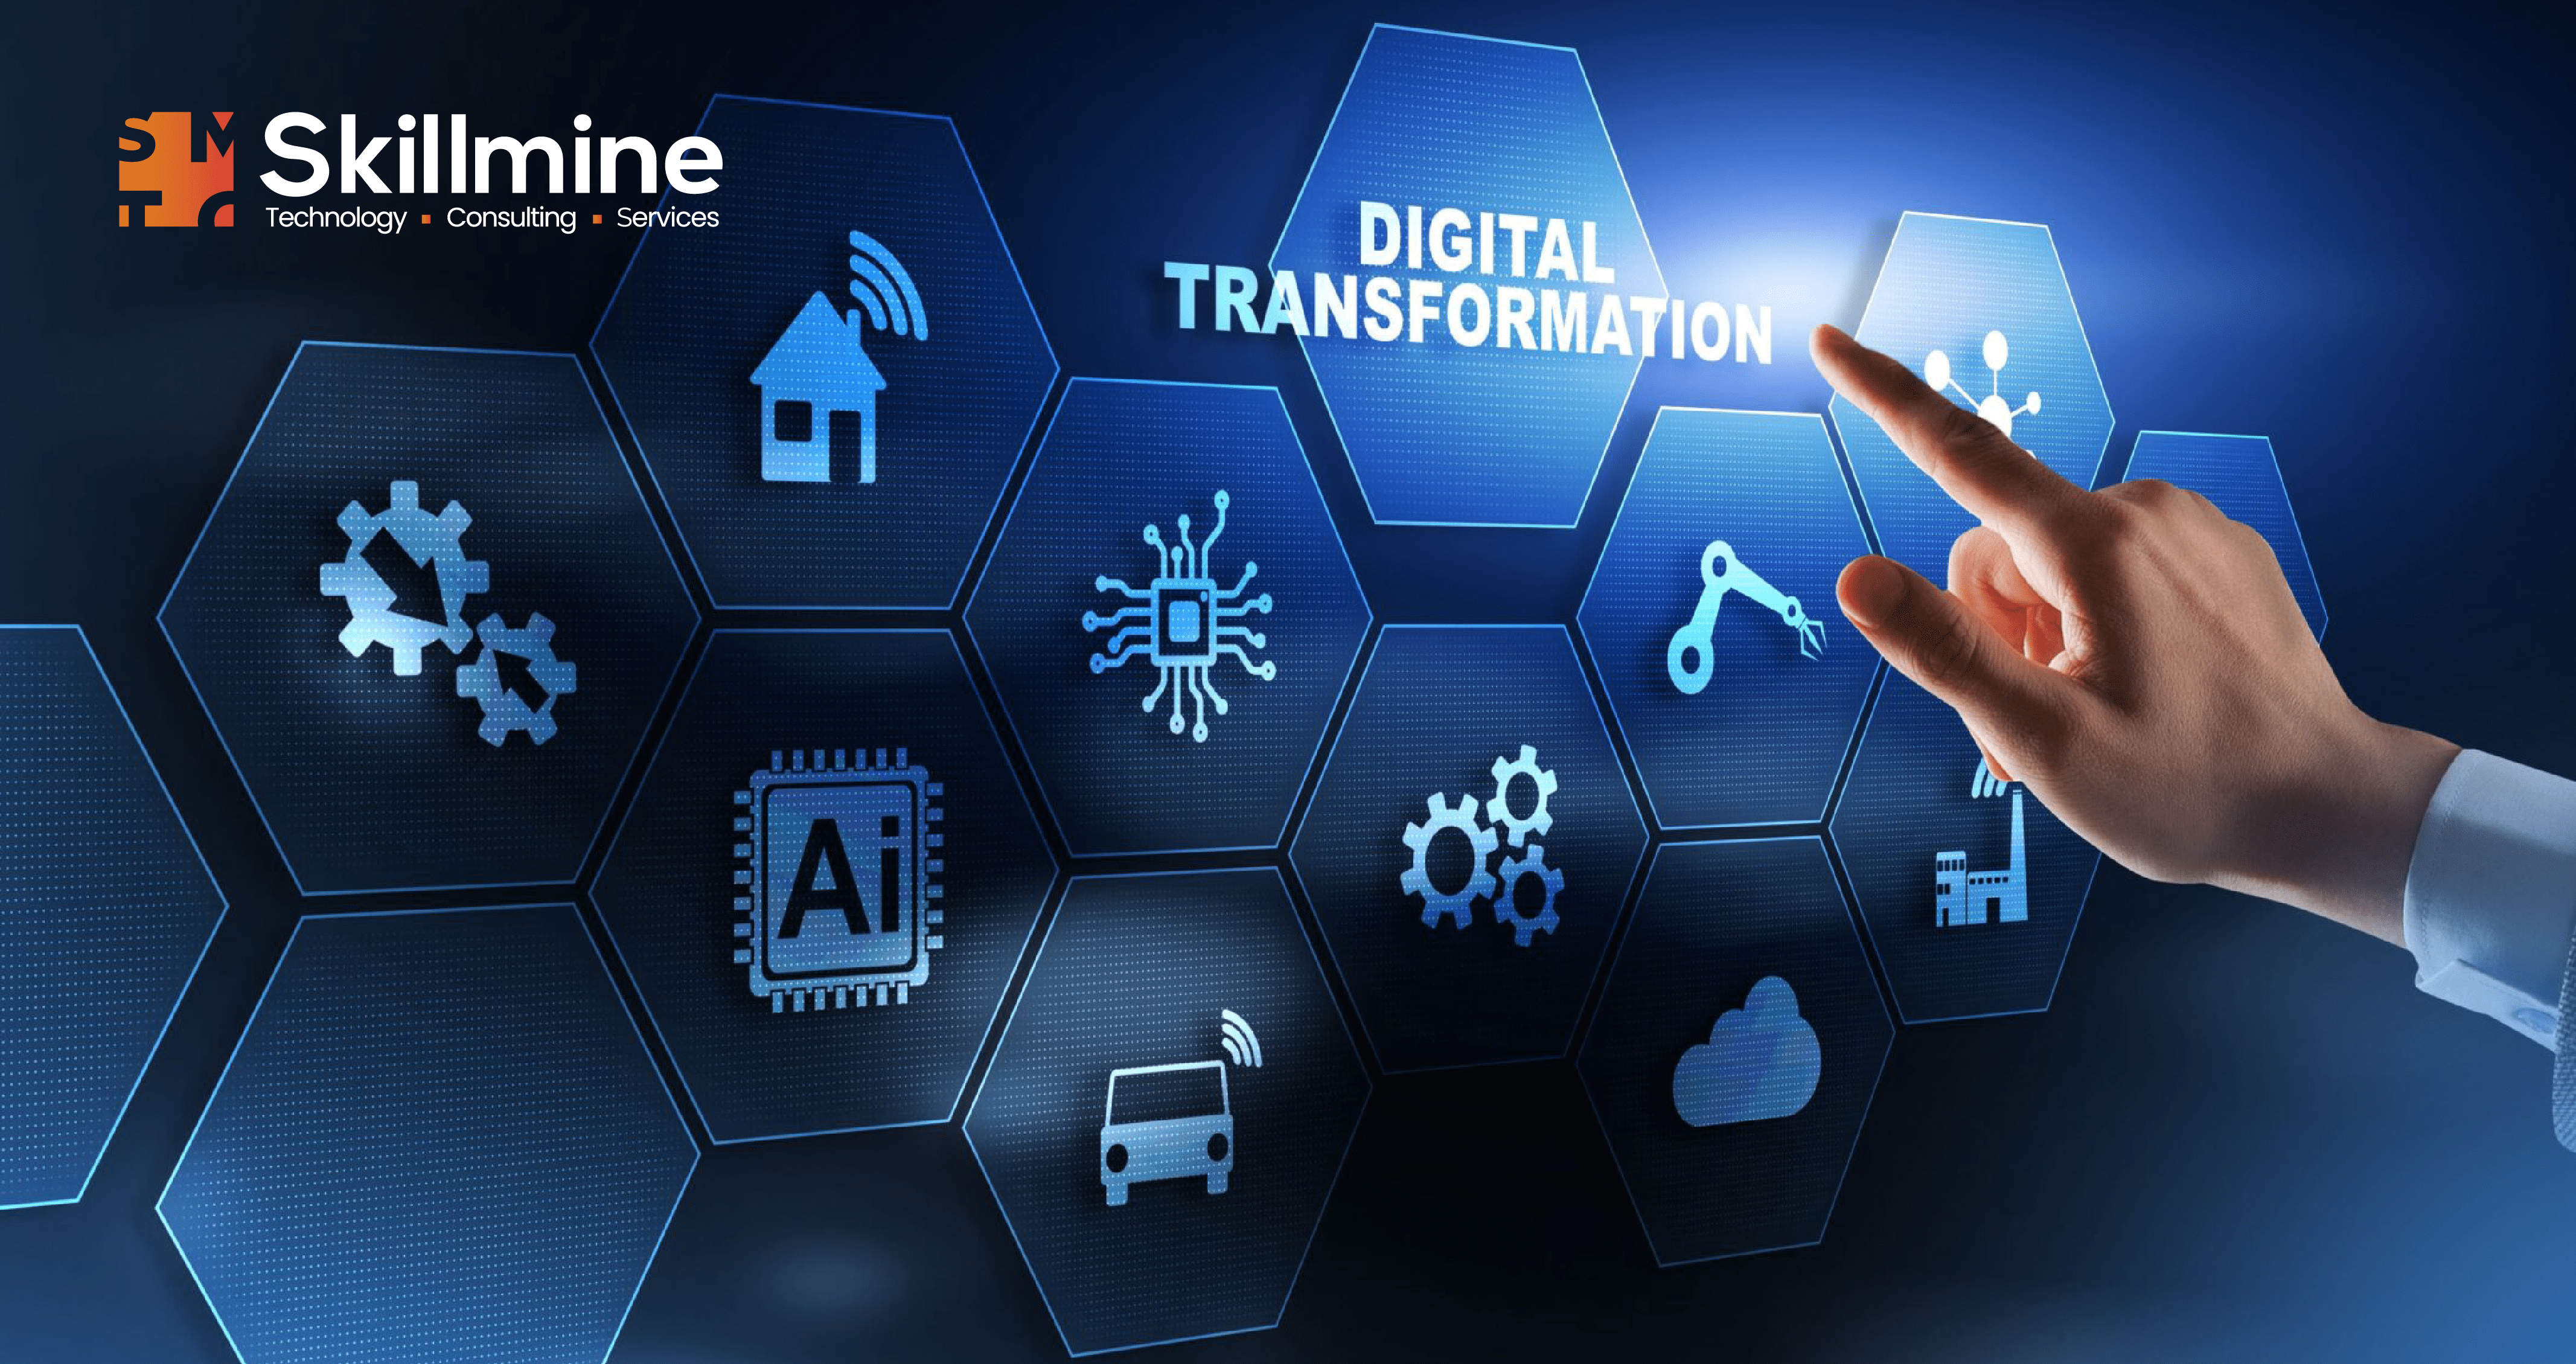 digital transformation, promoting flexibility, speed, and continuous improvement, empowering units to be responsive and adaptive while meeting executive goals.